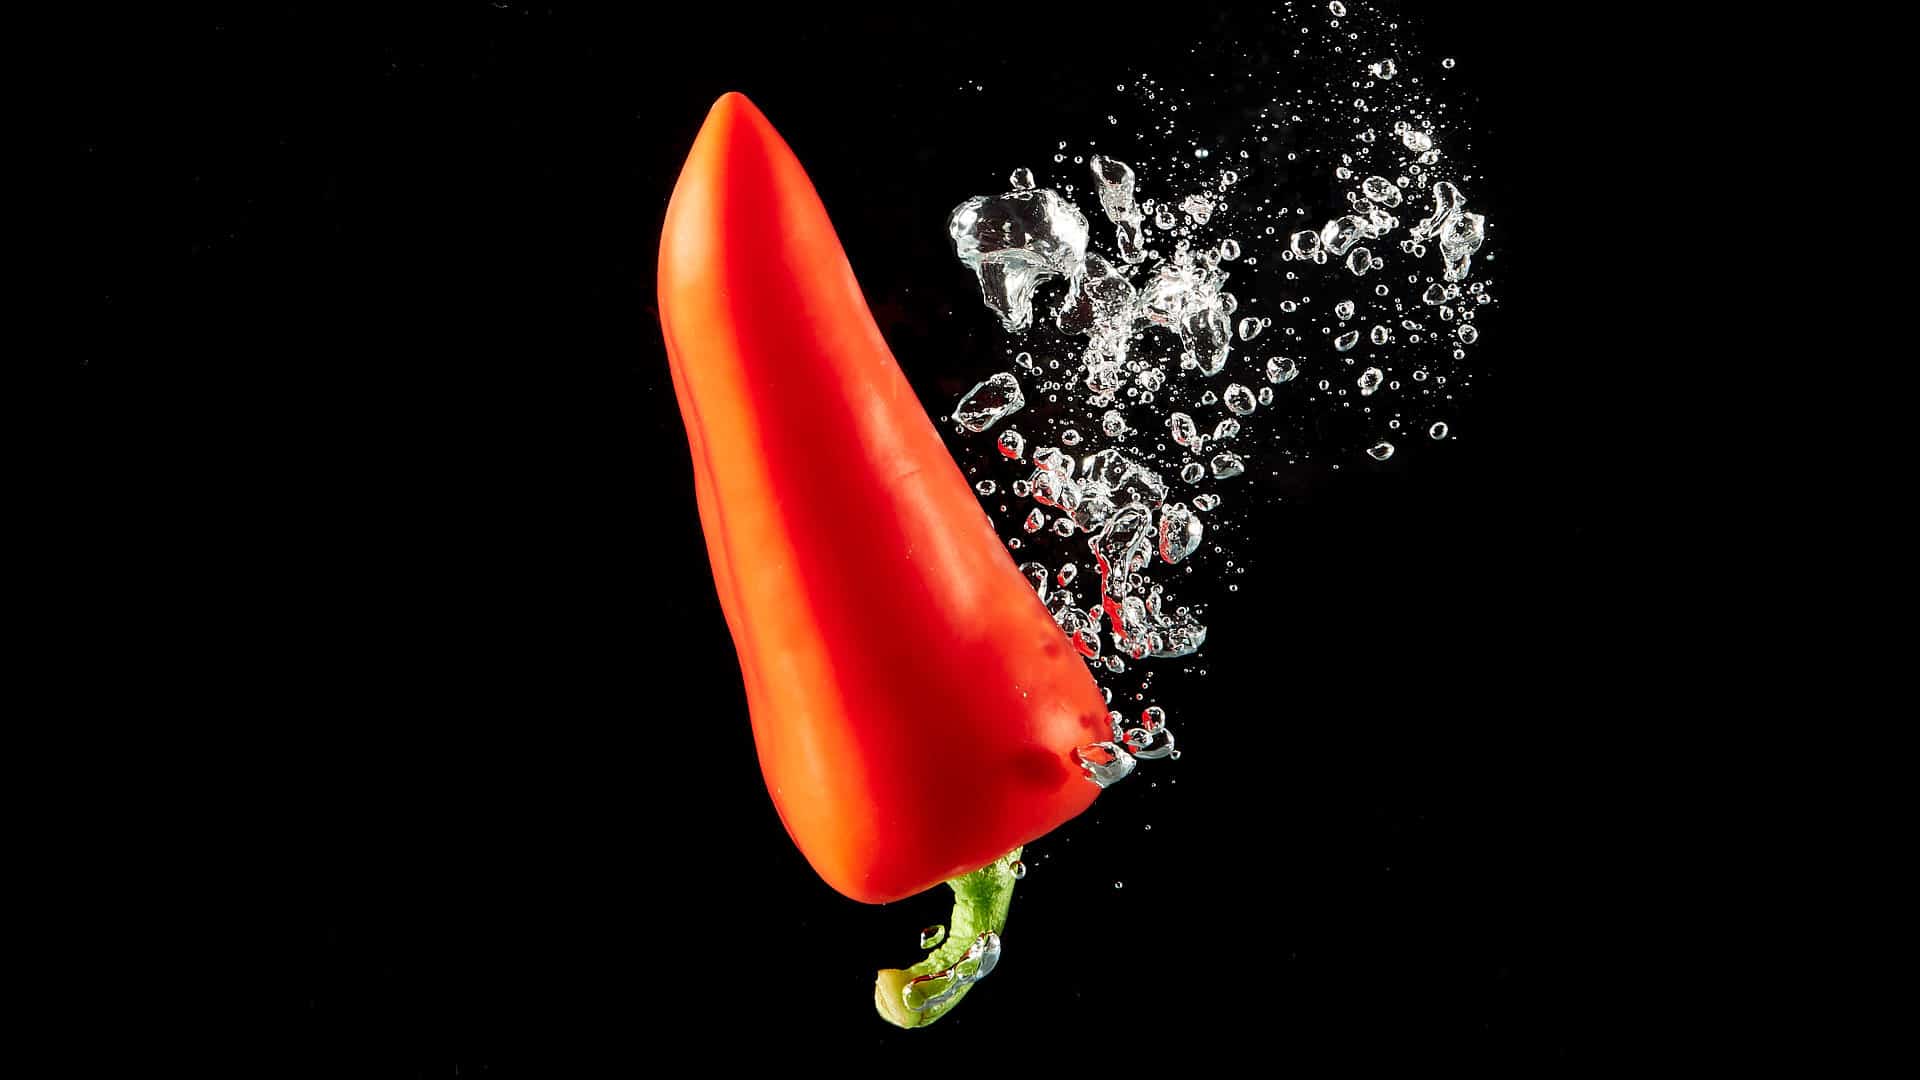 Sweet red pepper splashed in water on black background.